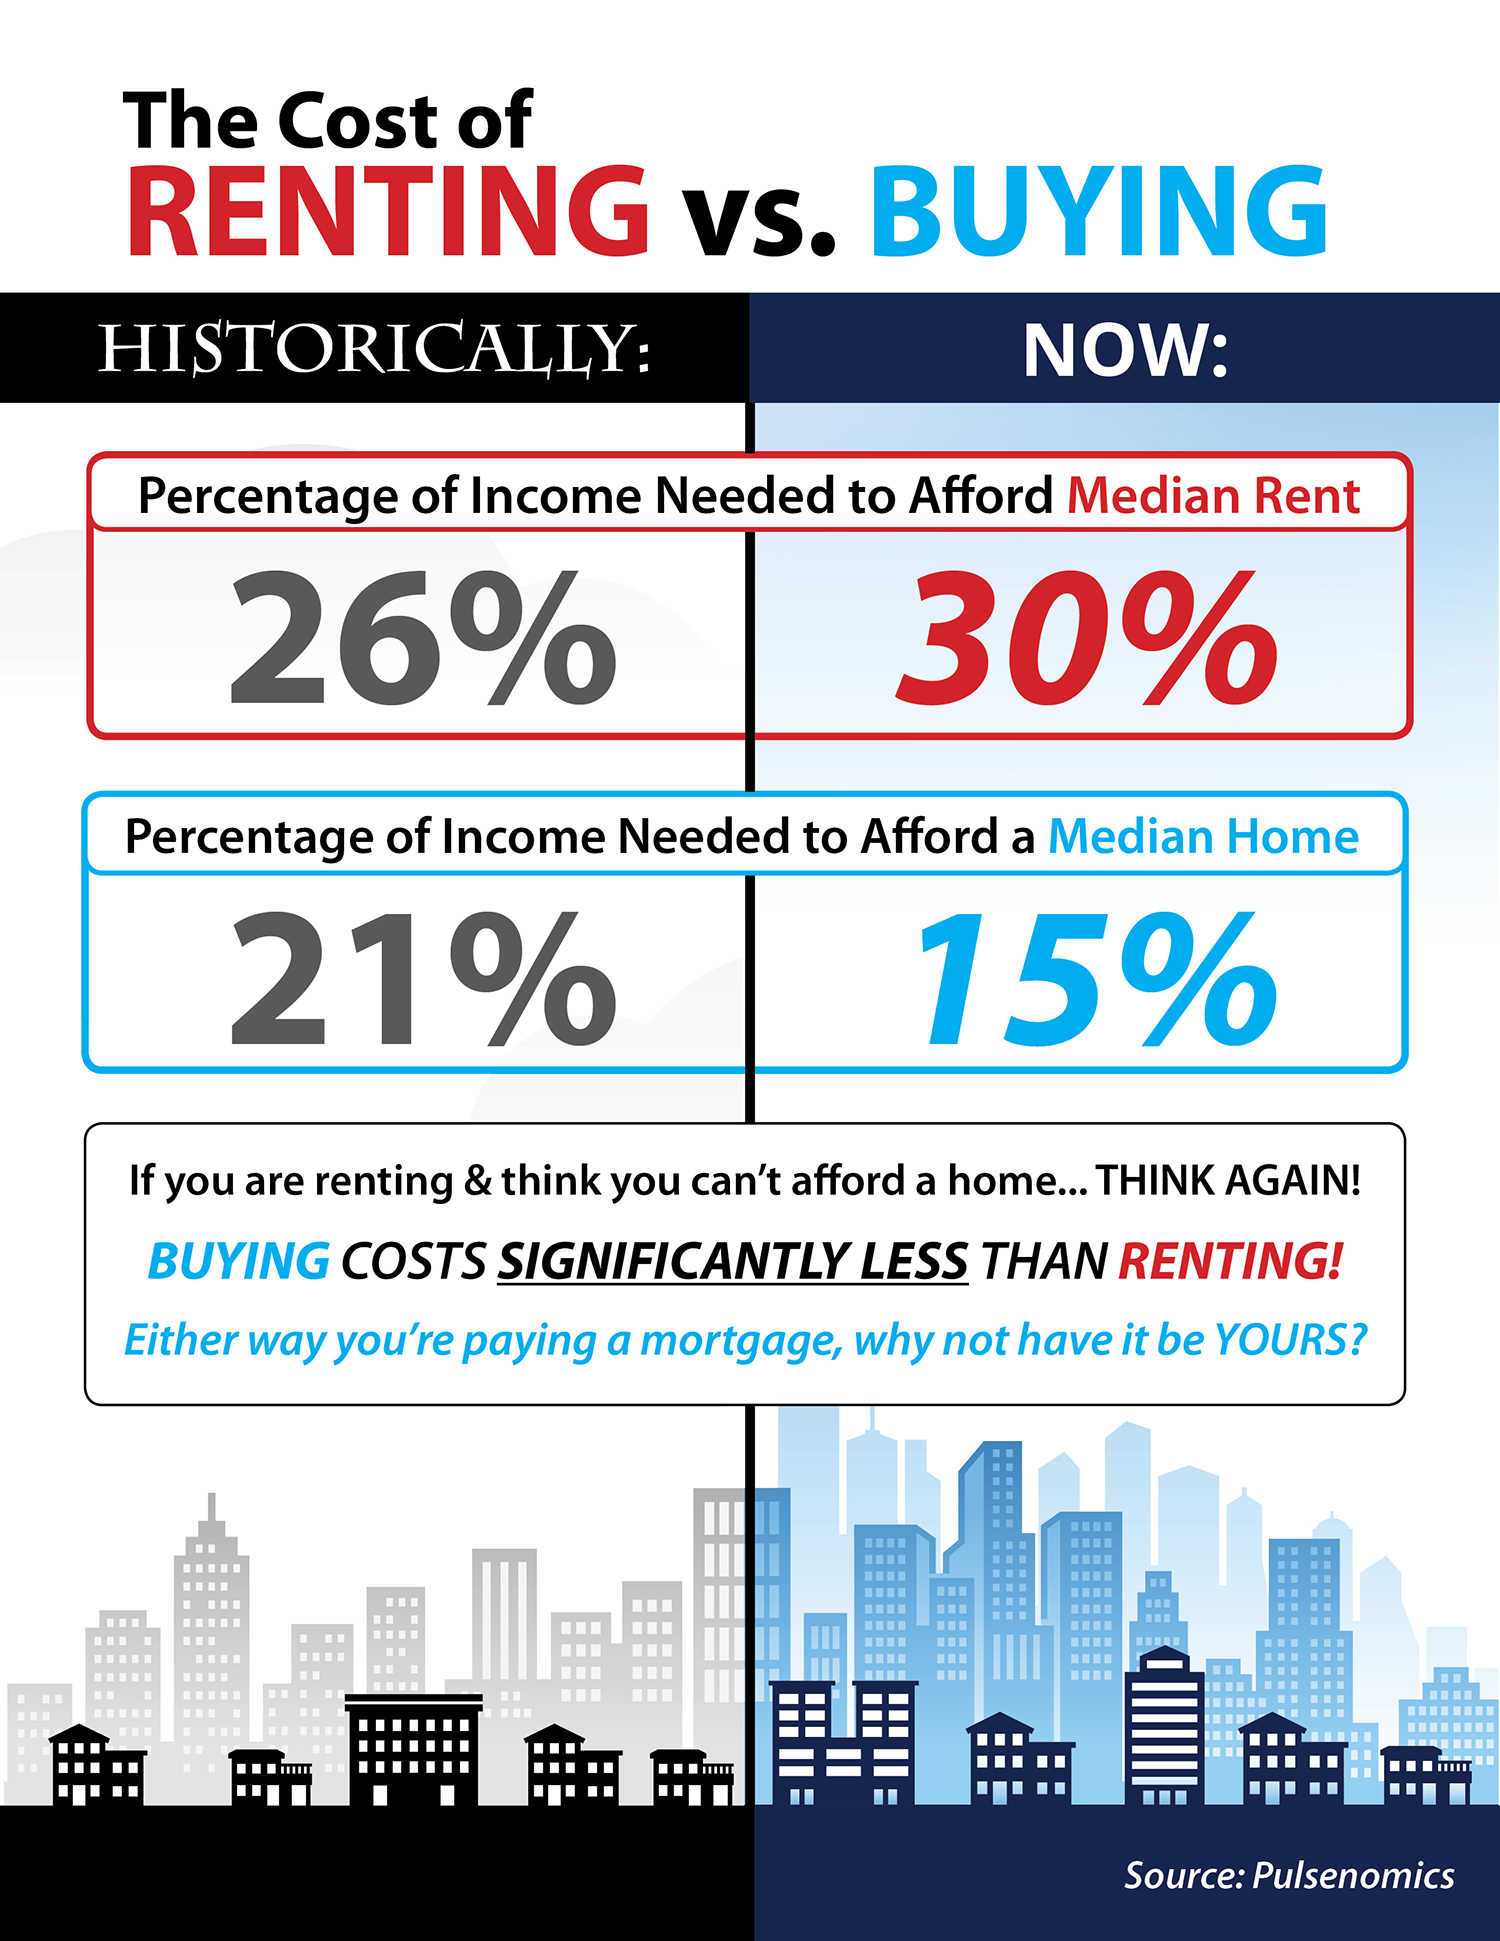 Renting vs. Buying What Does it Really Cost? [INFOGRAPHIC]